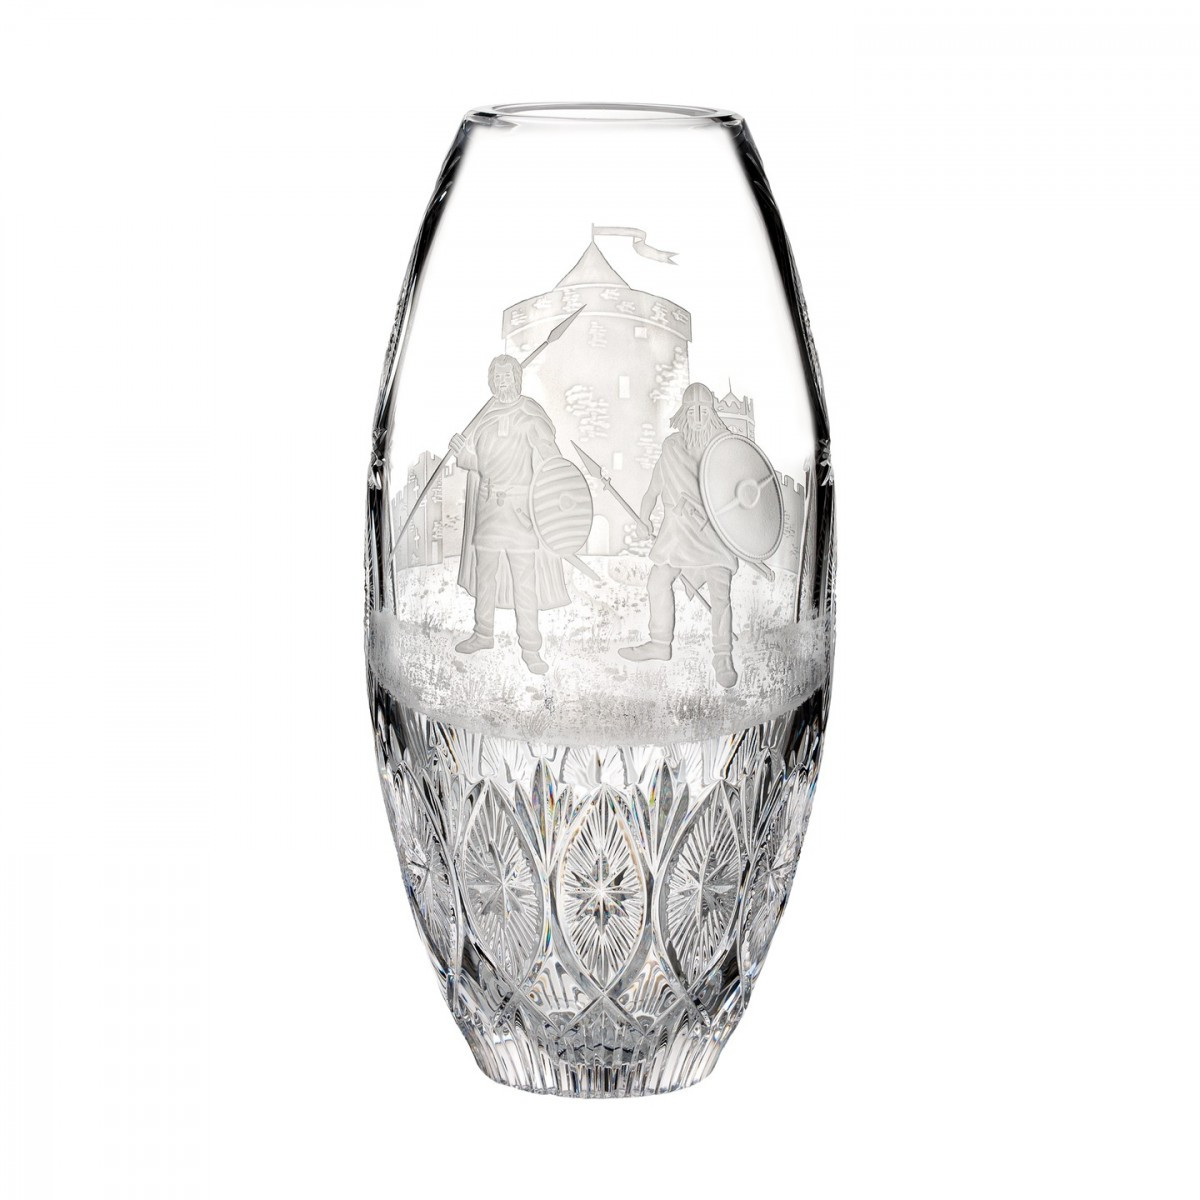 22 Stylish Waterford Maritana Vase 2024 free download waterford maritana vase of the vikings land in waterford reginalds tower tall vase limited with regard to the vikings land in waterford reginalds tower tall vase limited edition of 60